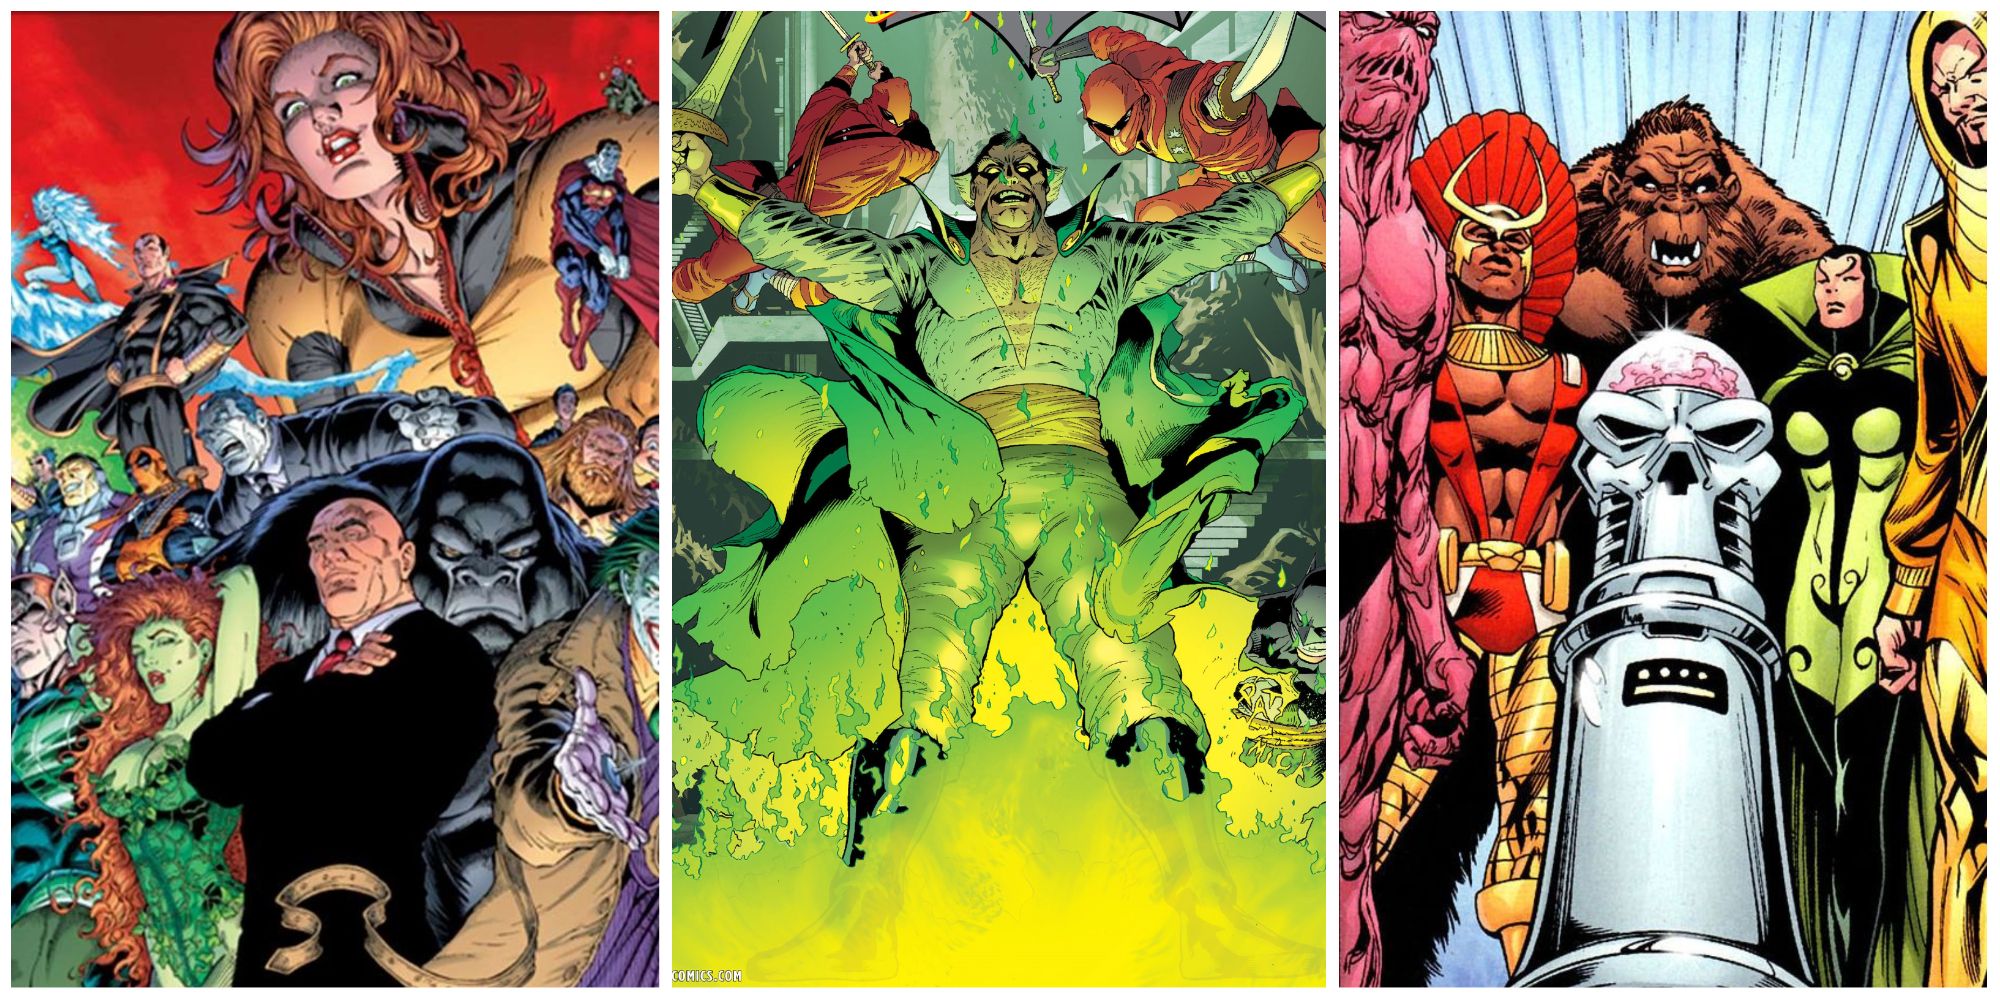 A split image of various secret societies, including the Legion of Doom, League of Assassins, and the Brotherhood of Evil from DC Comics